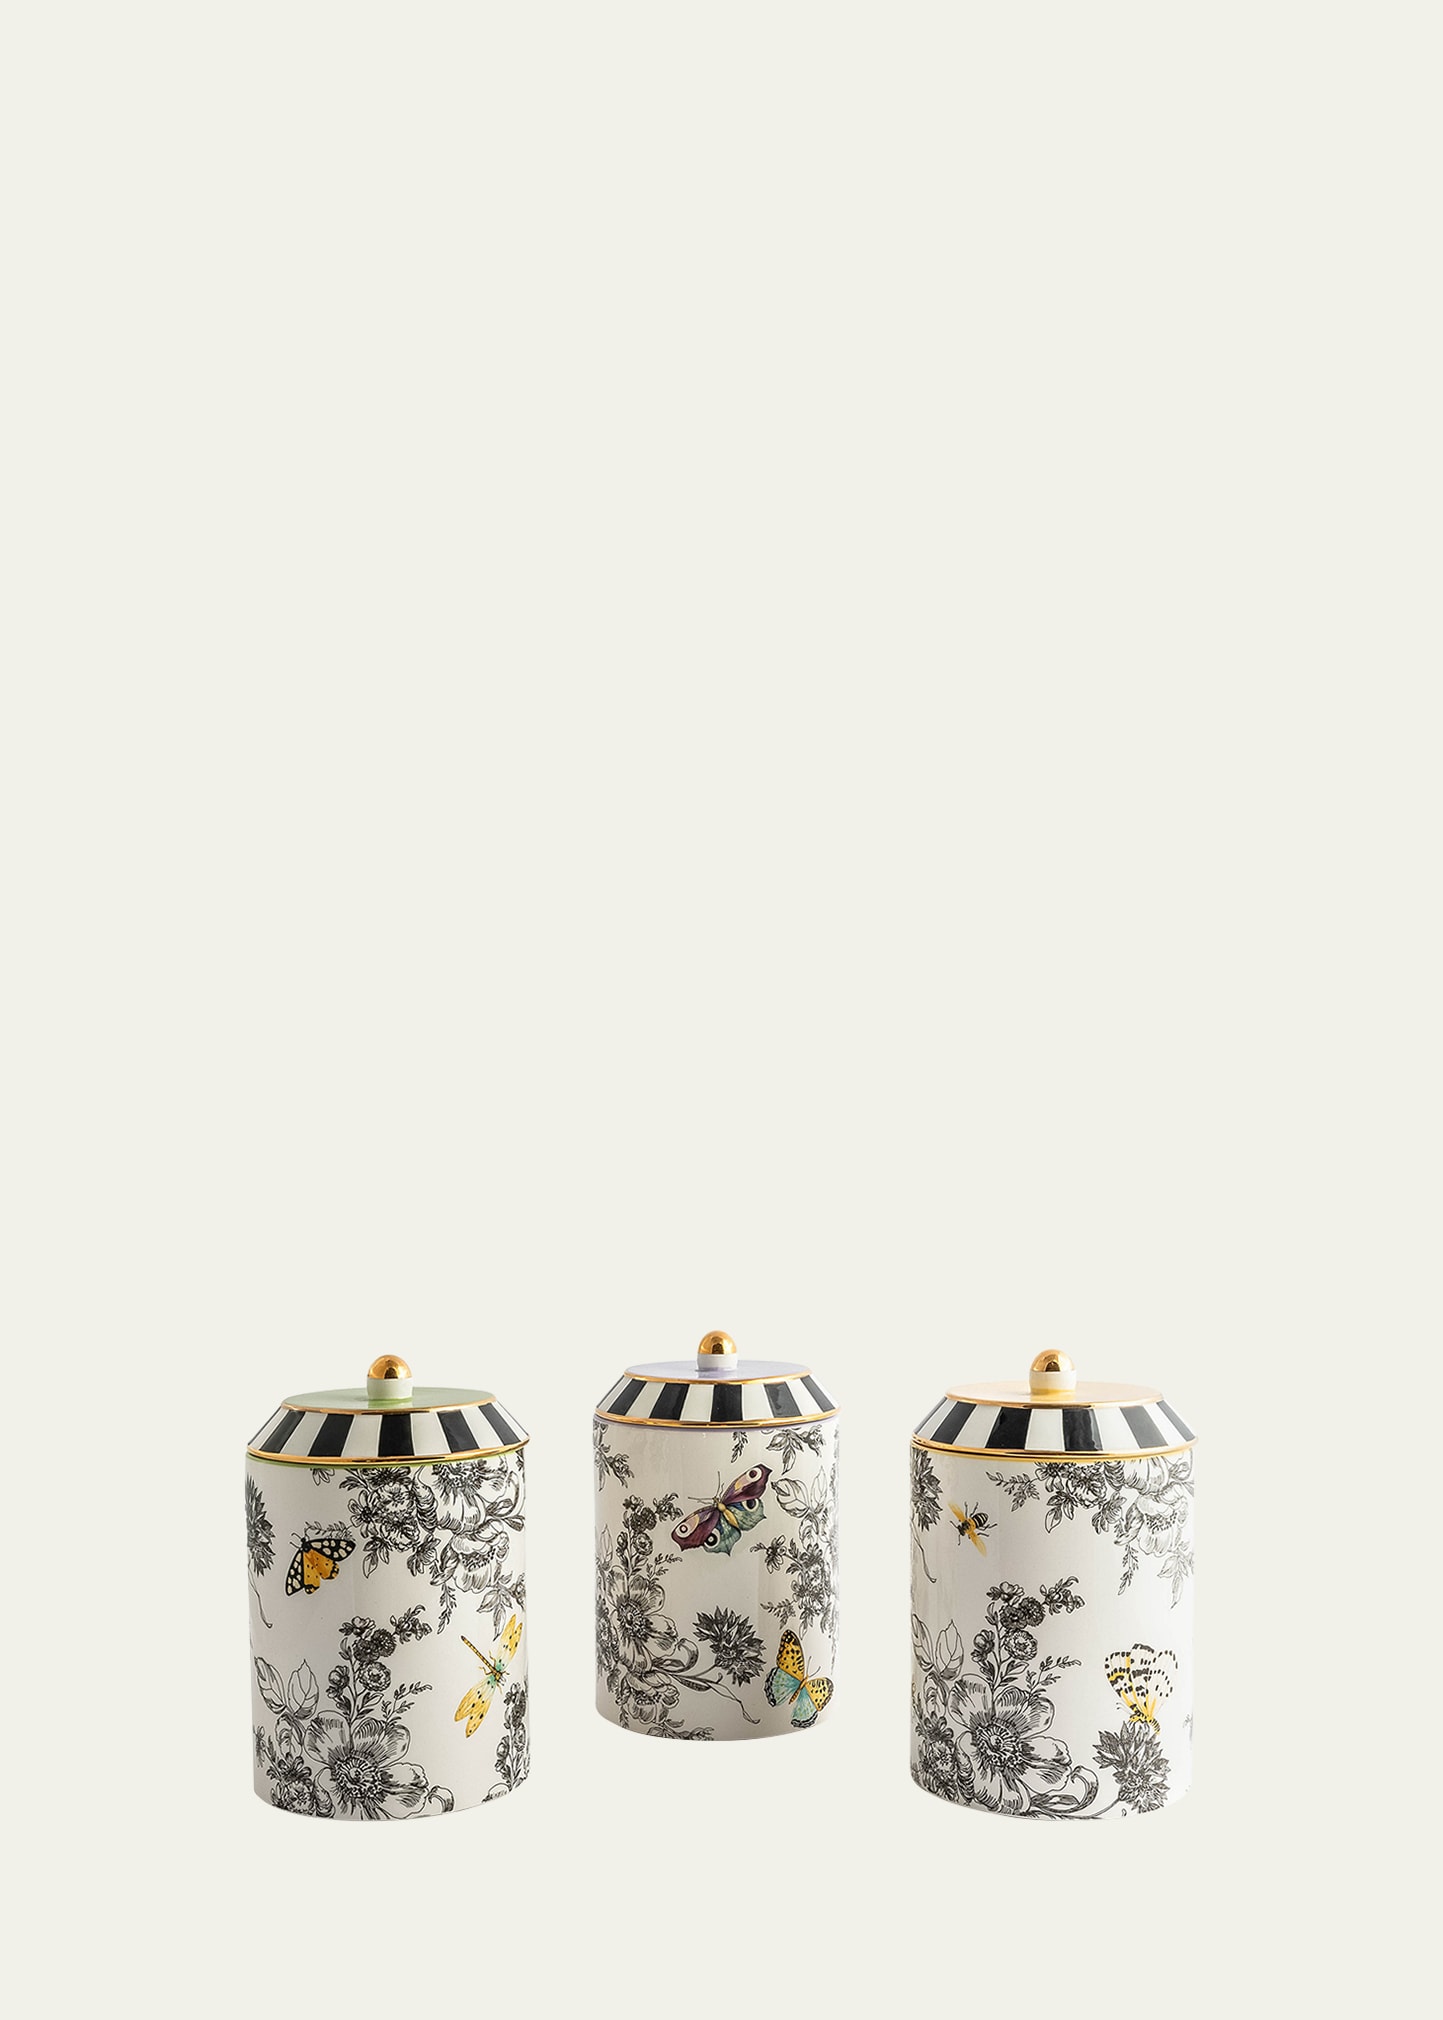 Butterfly Toile Canisters, Set of 3